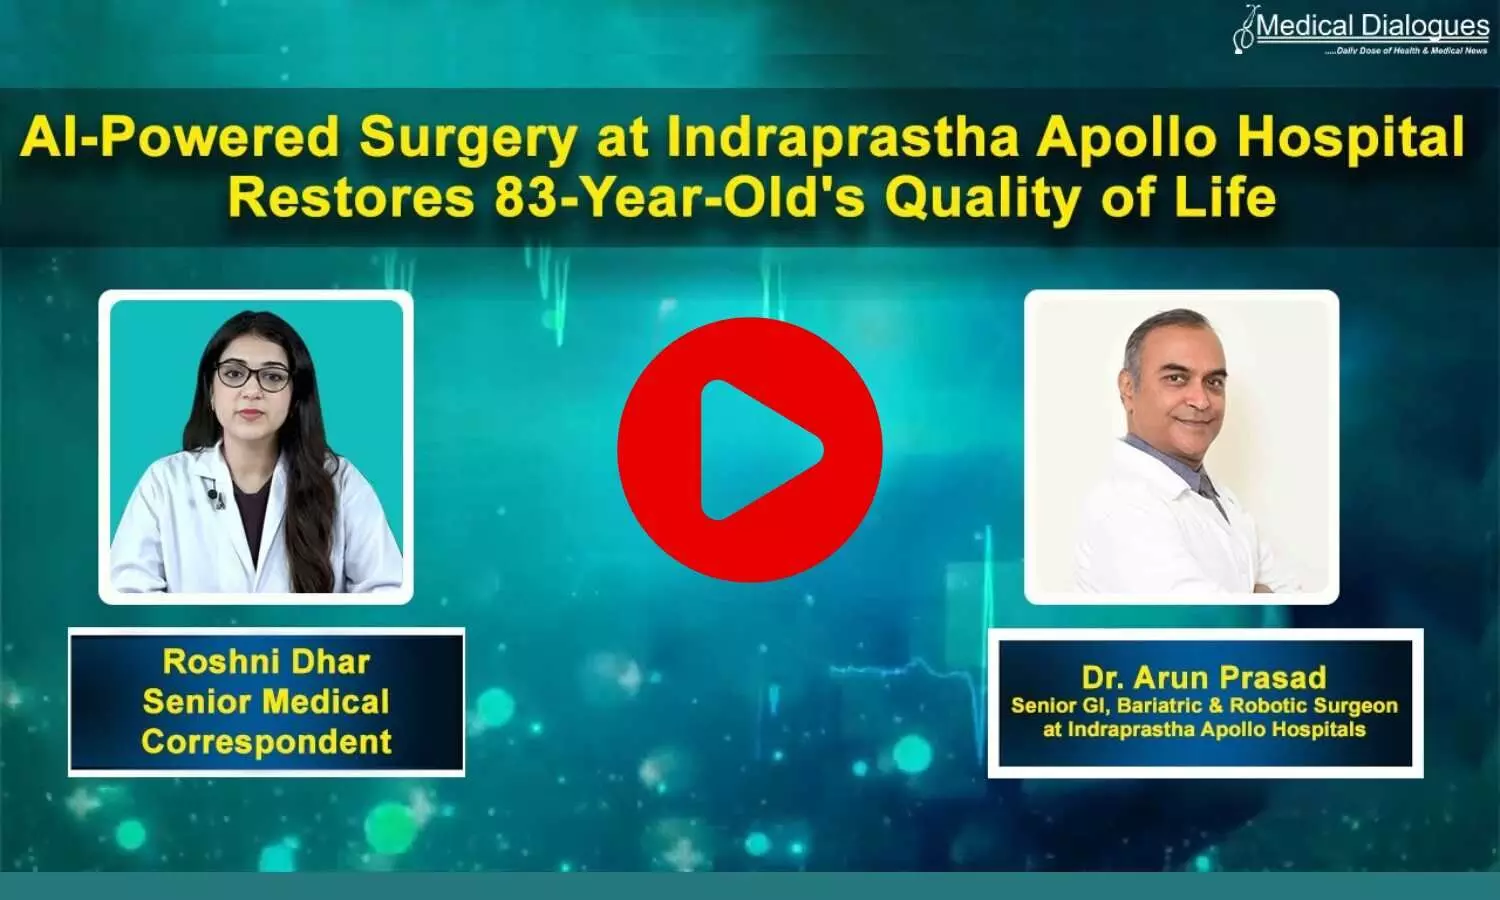 AI-powered surgery at Indraprastha Apollo Hospital restores 83-year-olds quality of life